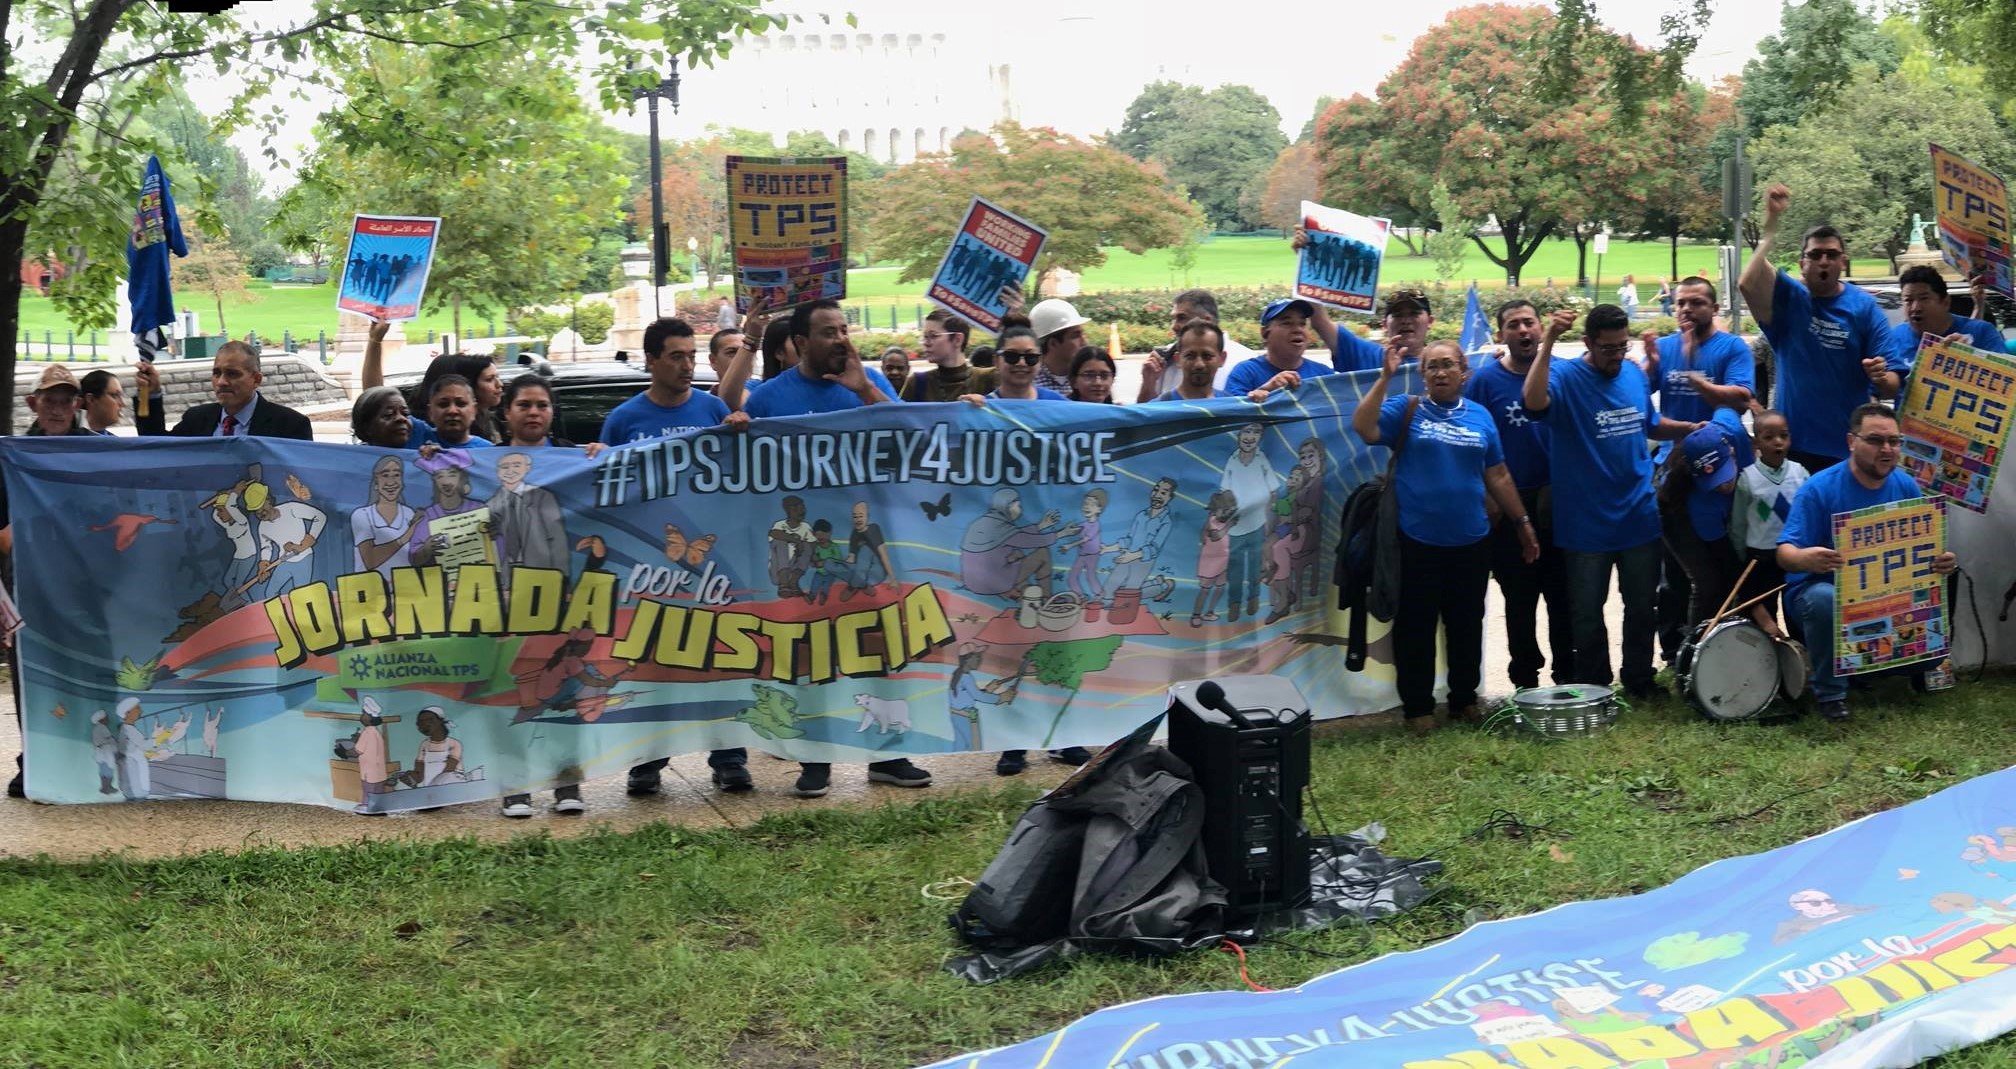 Immigrants make “Journey 4 Justice” to save TPS